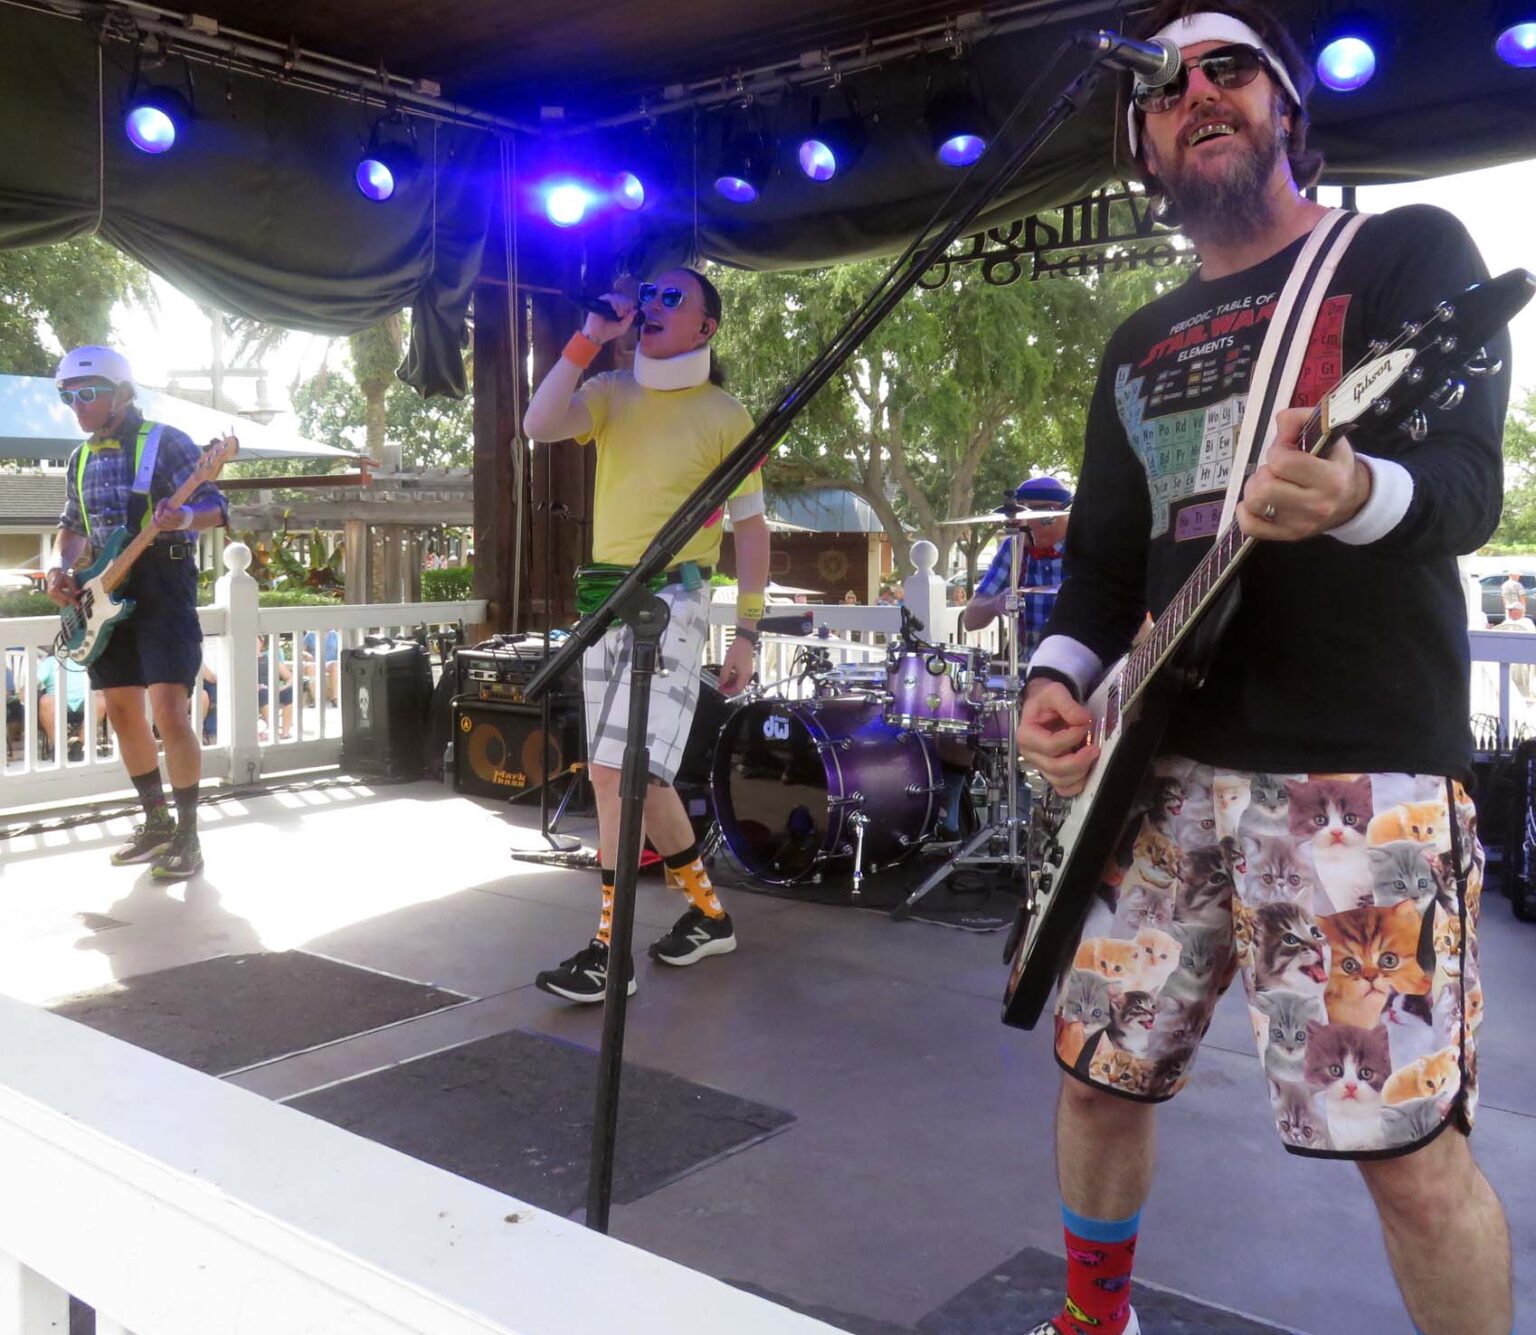 Spazmatics appealing to audience in The Villages that grew up with MTV - Villages-News.com